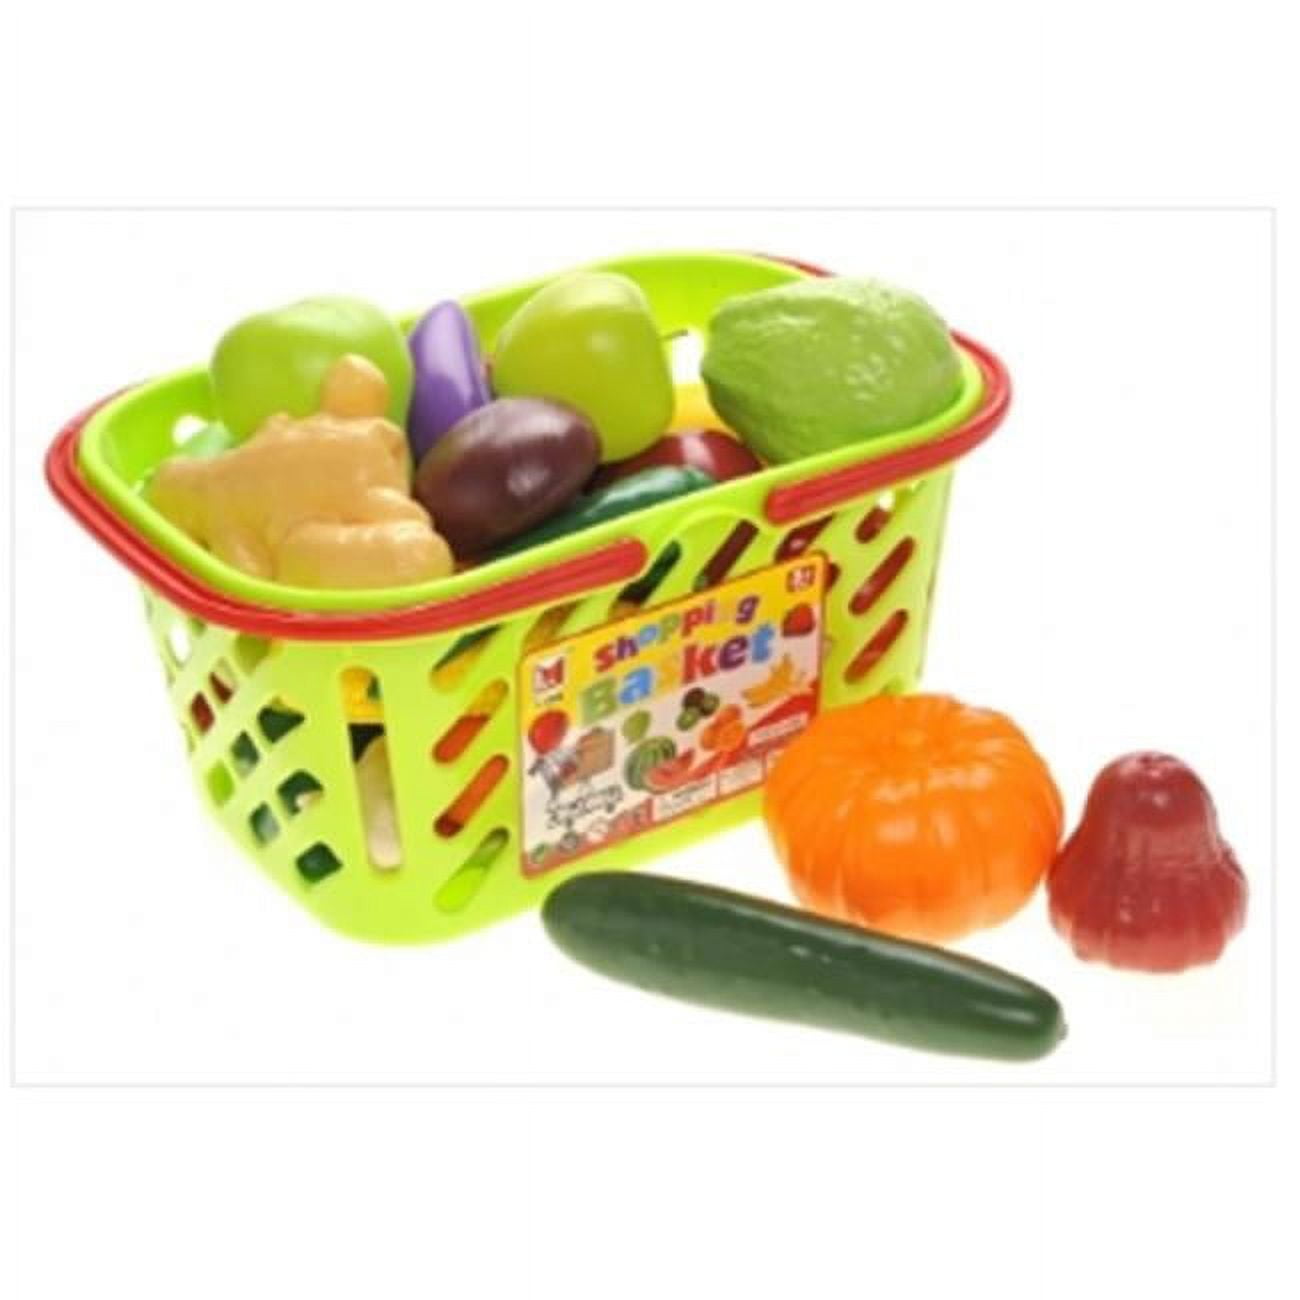 Picture of AZimport PS608B Fruits & Vegetables Shopping Basket Grocery Play Food Set for Kids